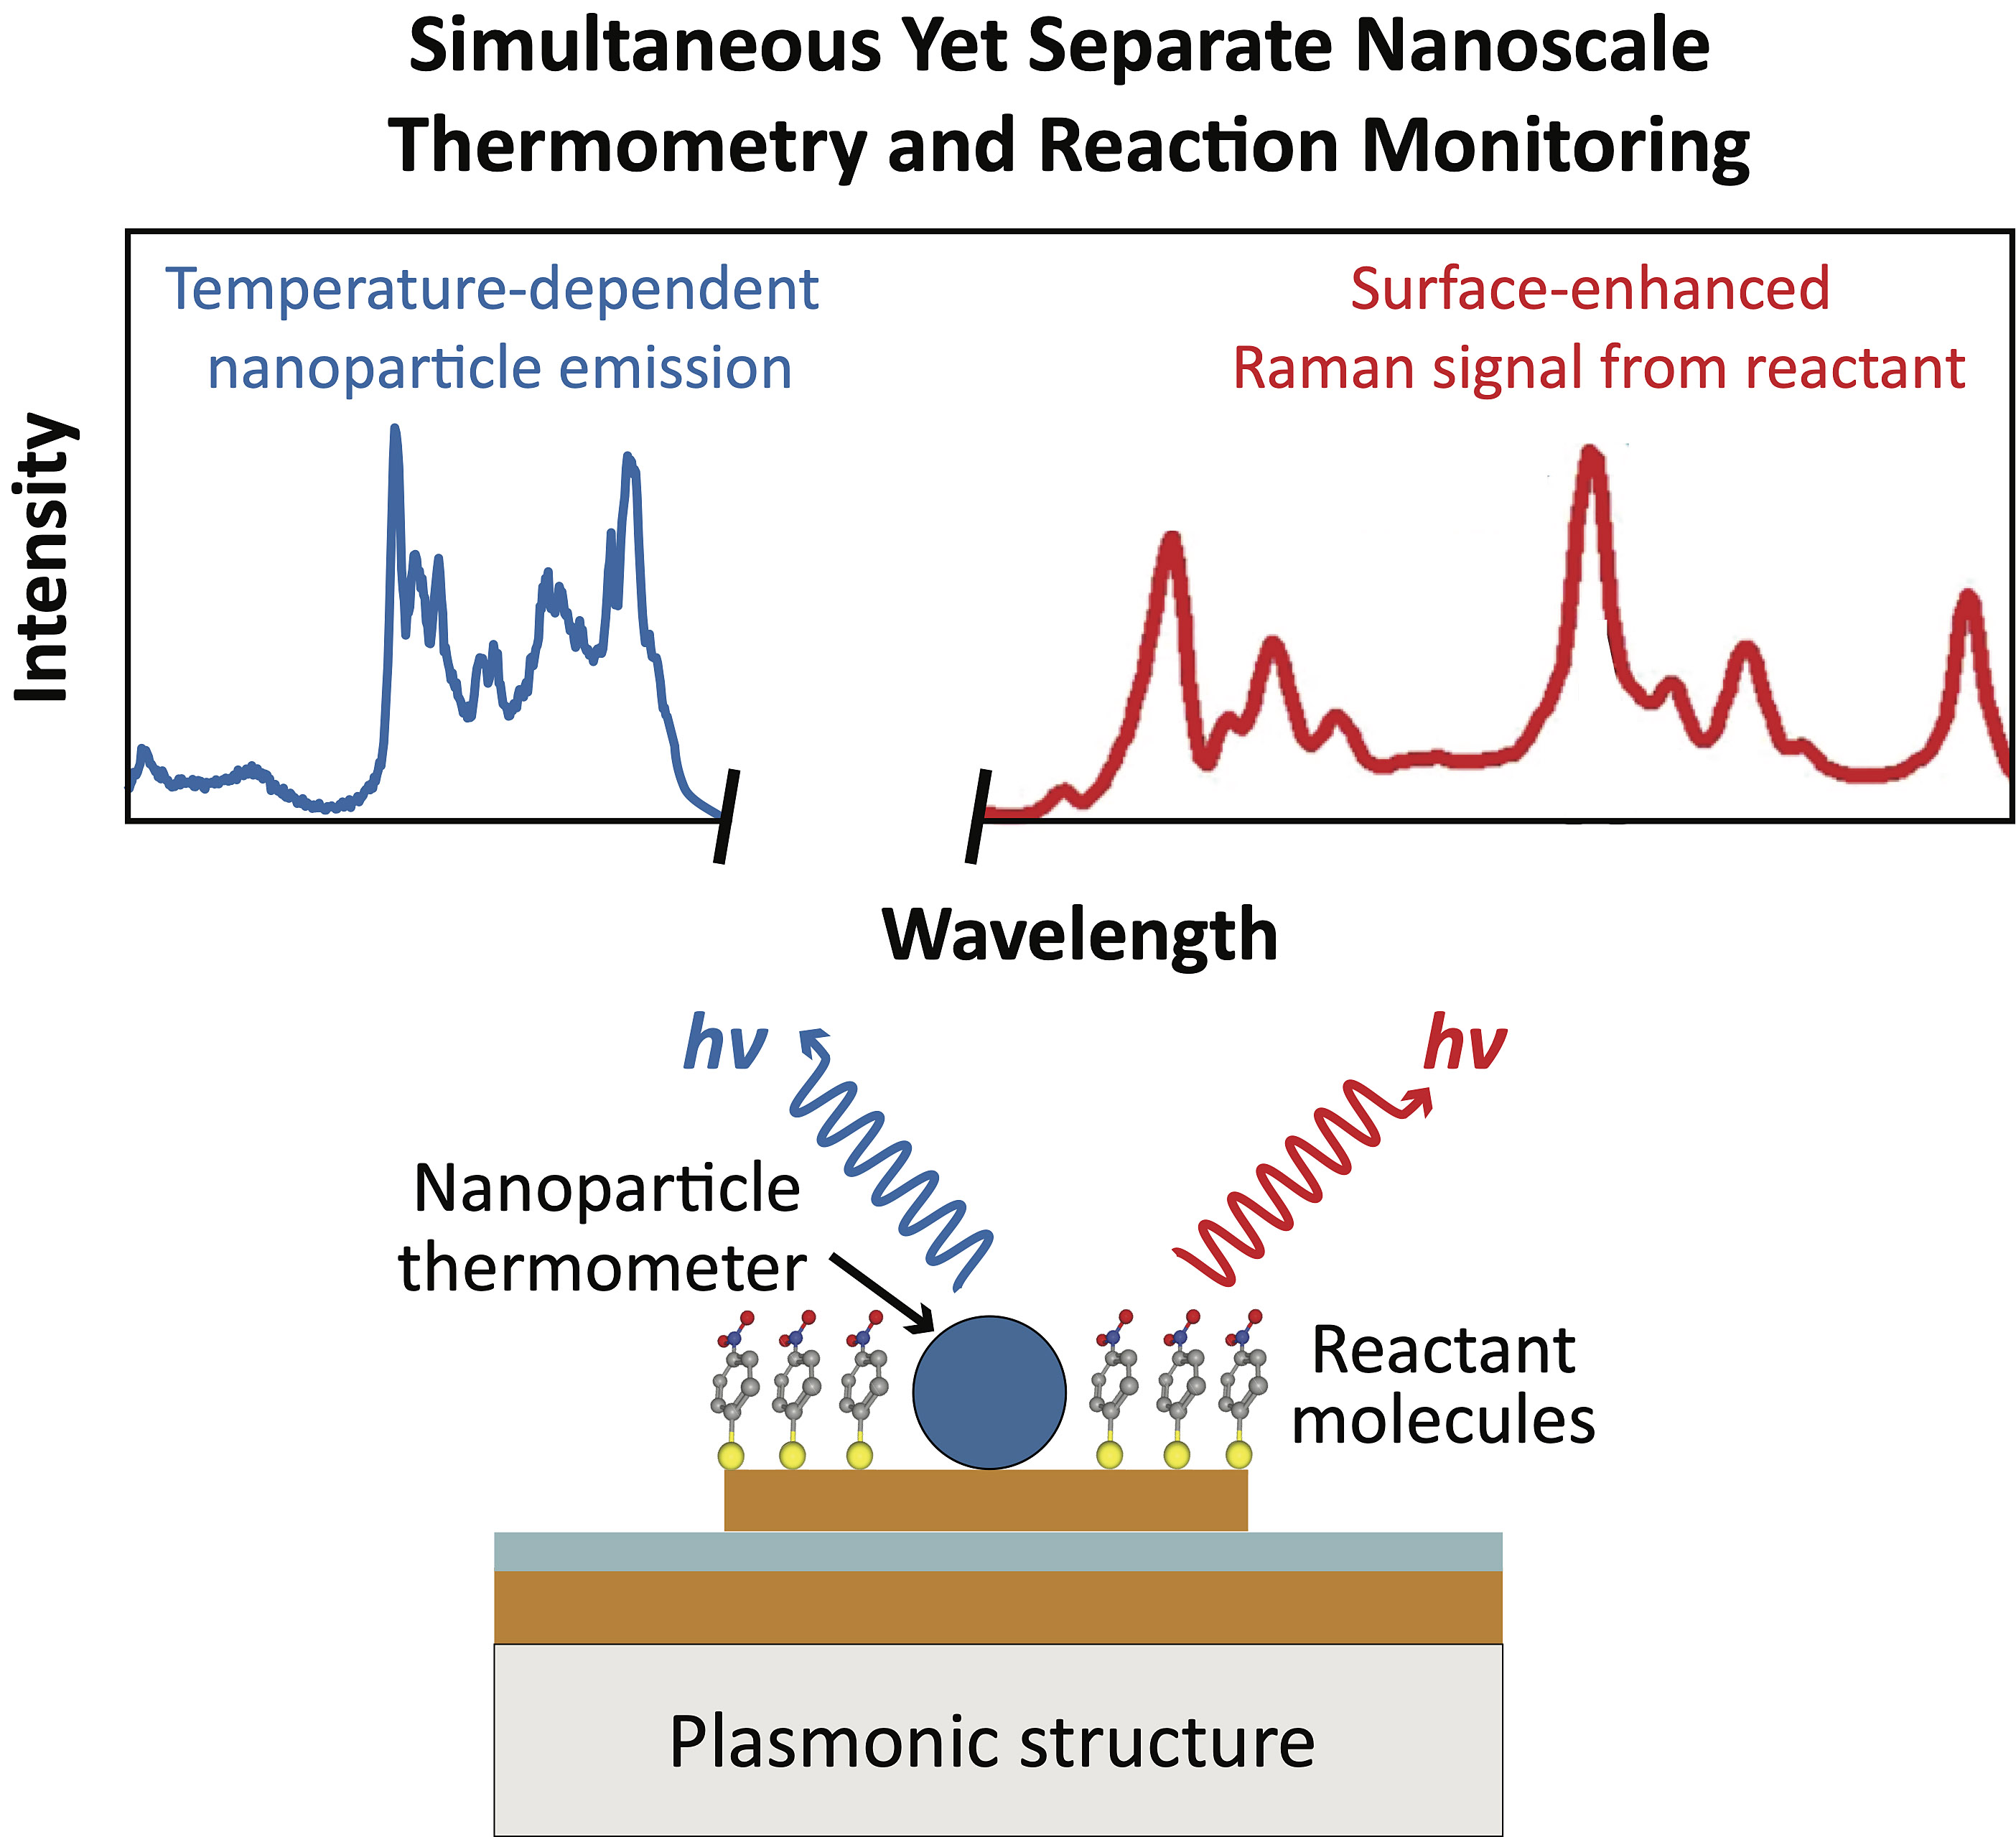 A chart showing simultaneous yet separate nanoscale thermometry and reaction monitoring.